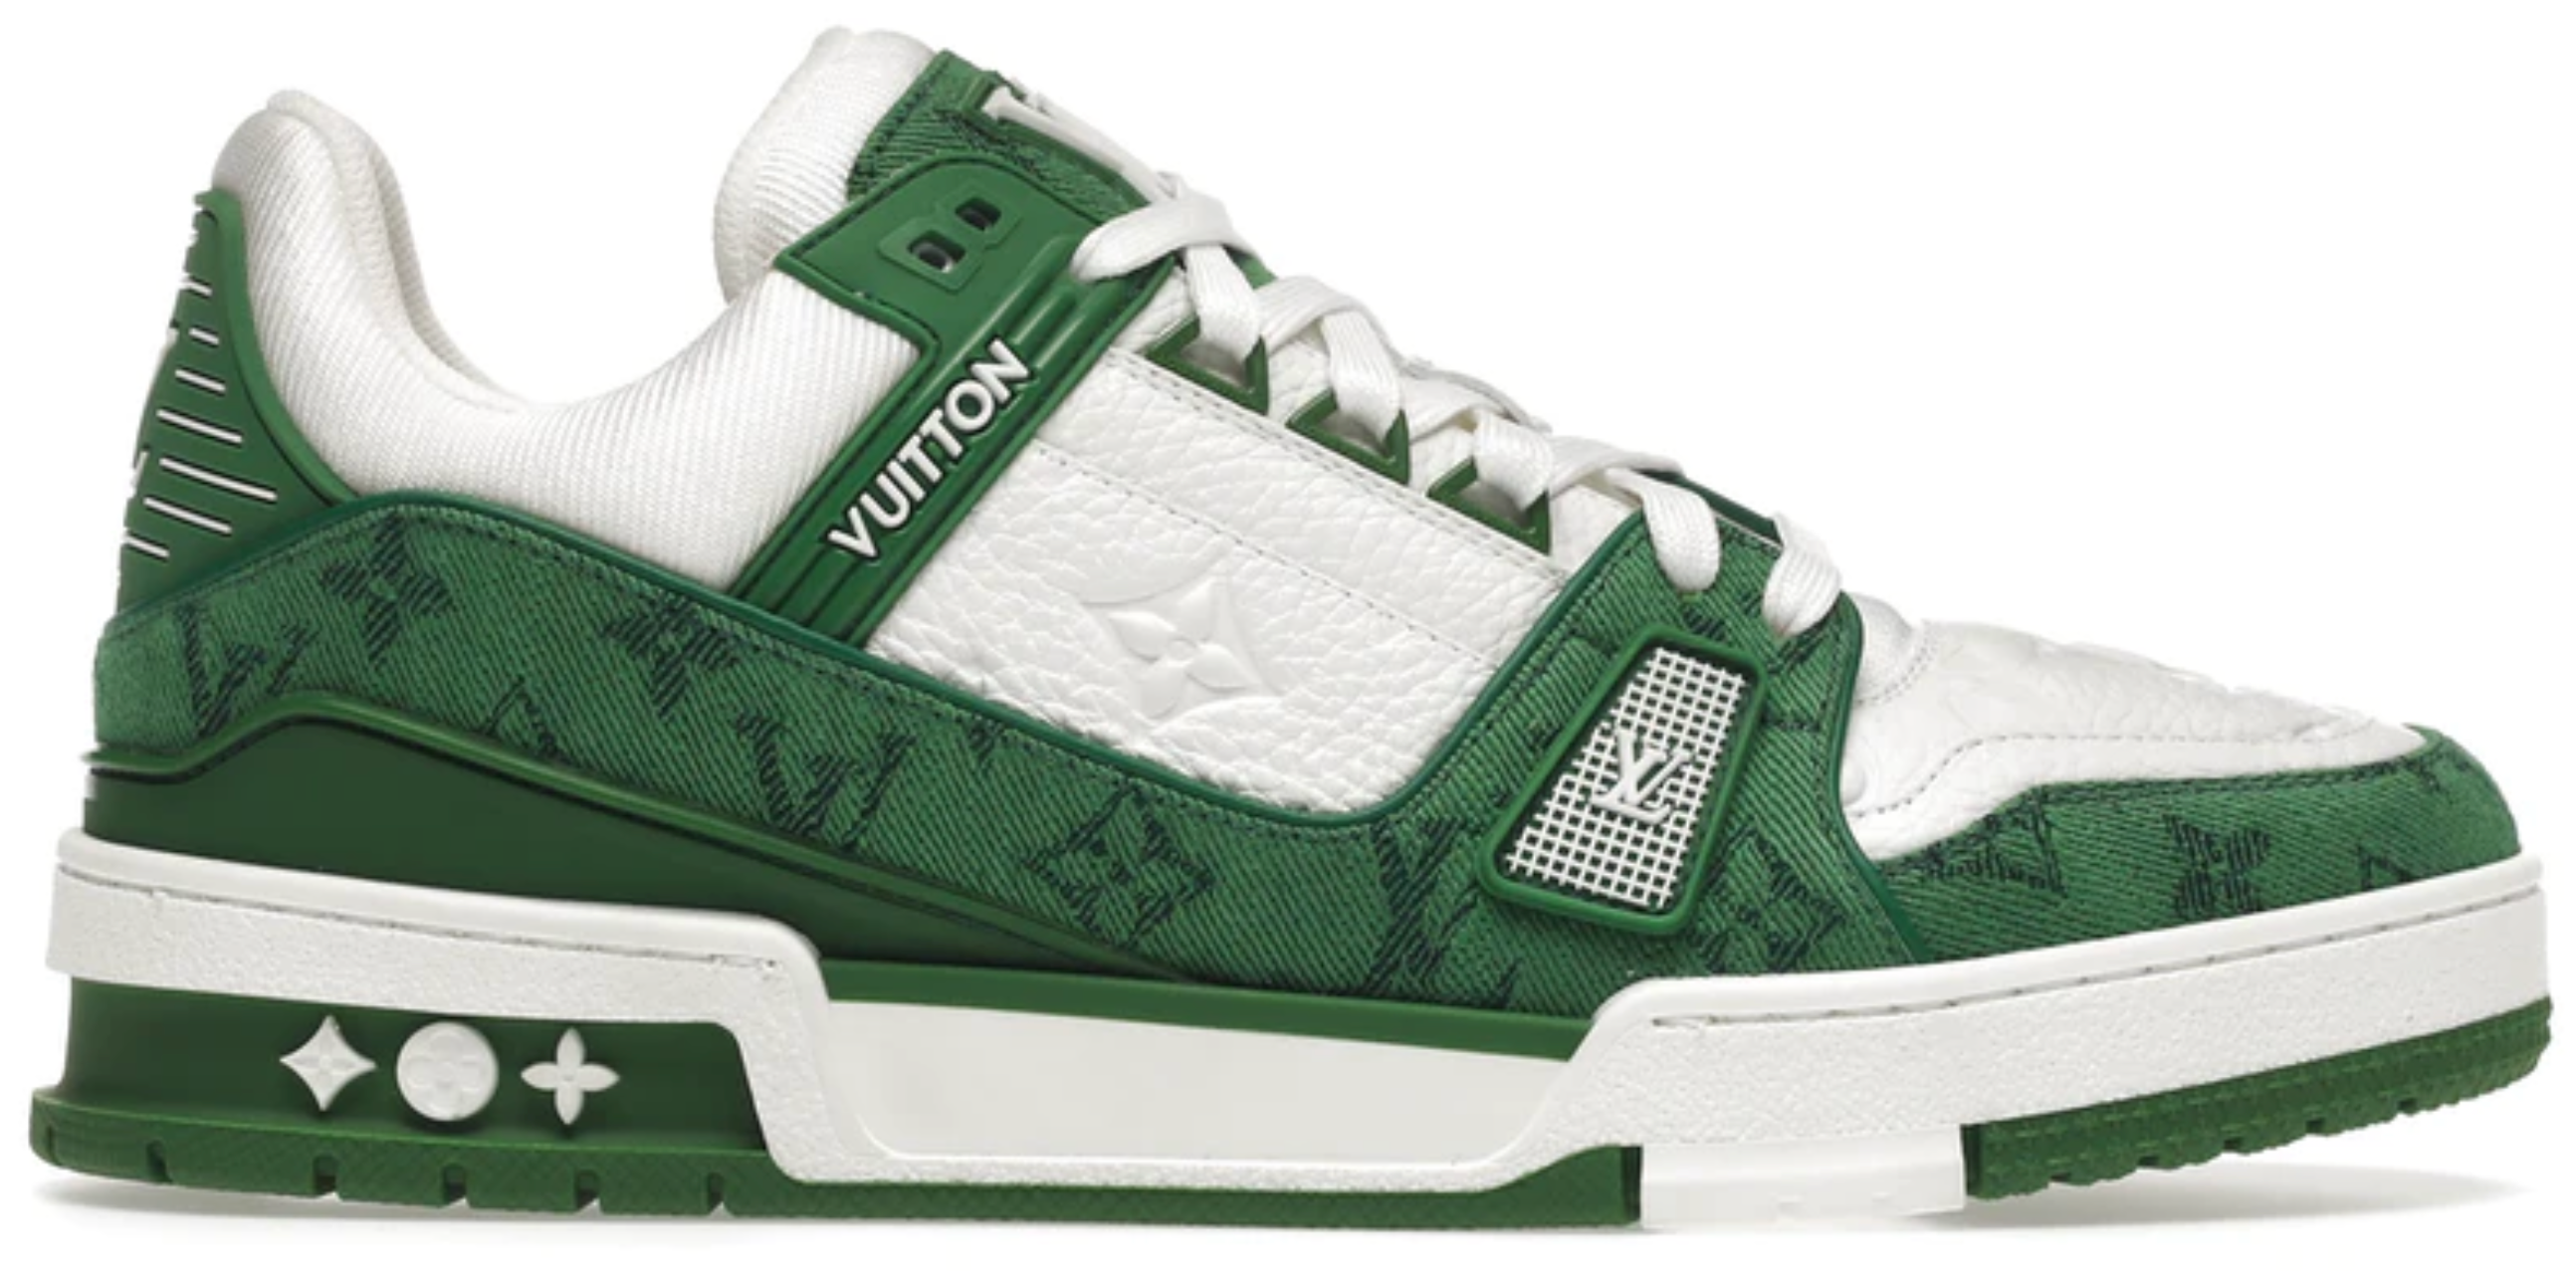 An Exclusive Look at the Louis Vuitton LVSK8 Sneaker - The Edit LDN